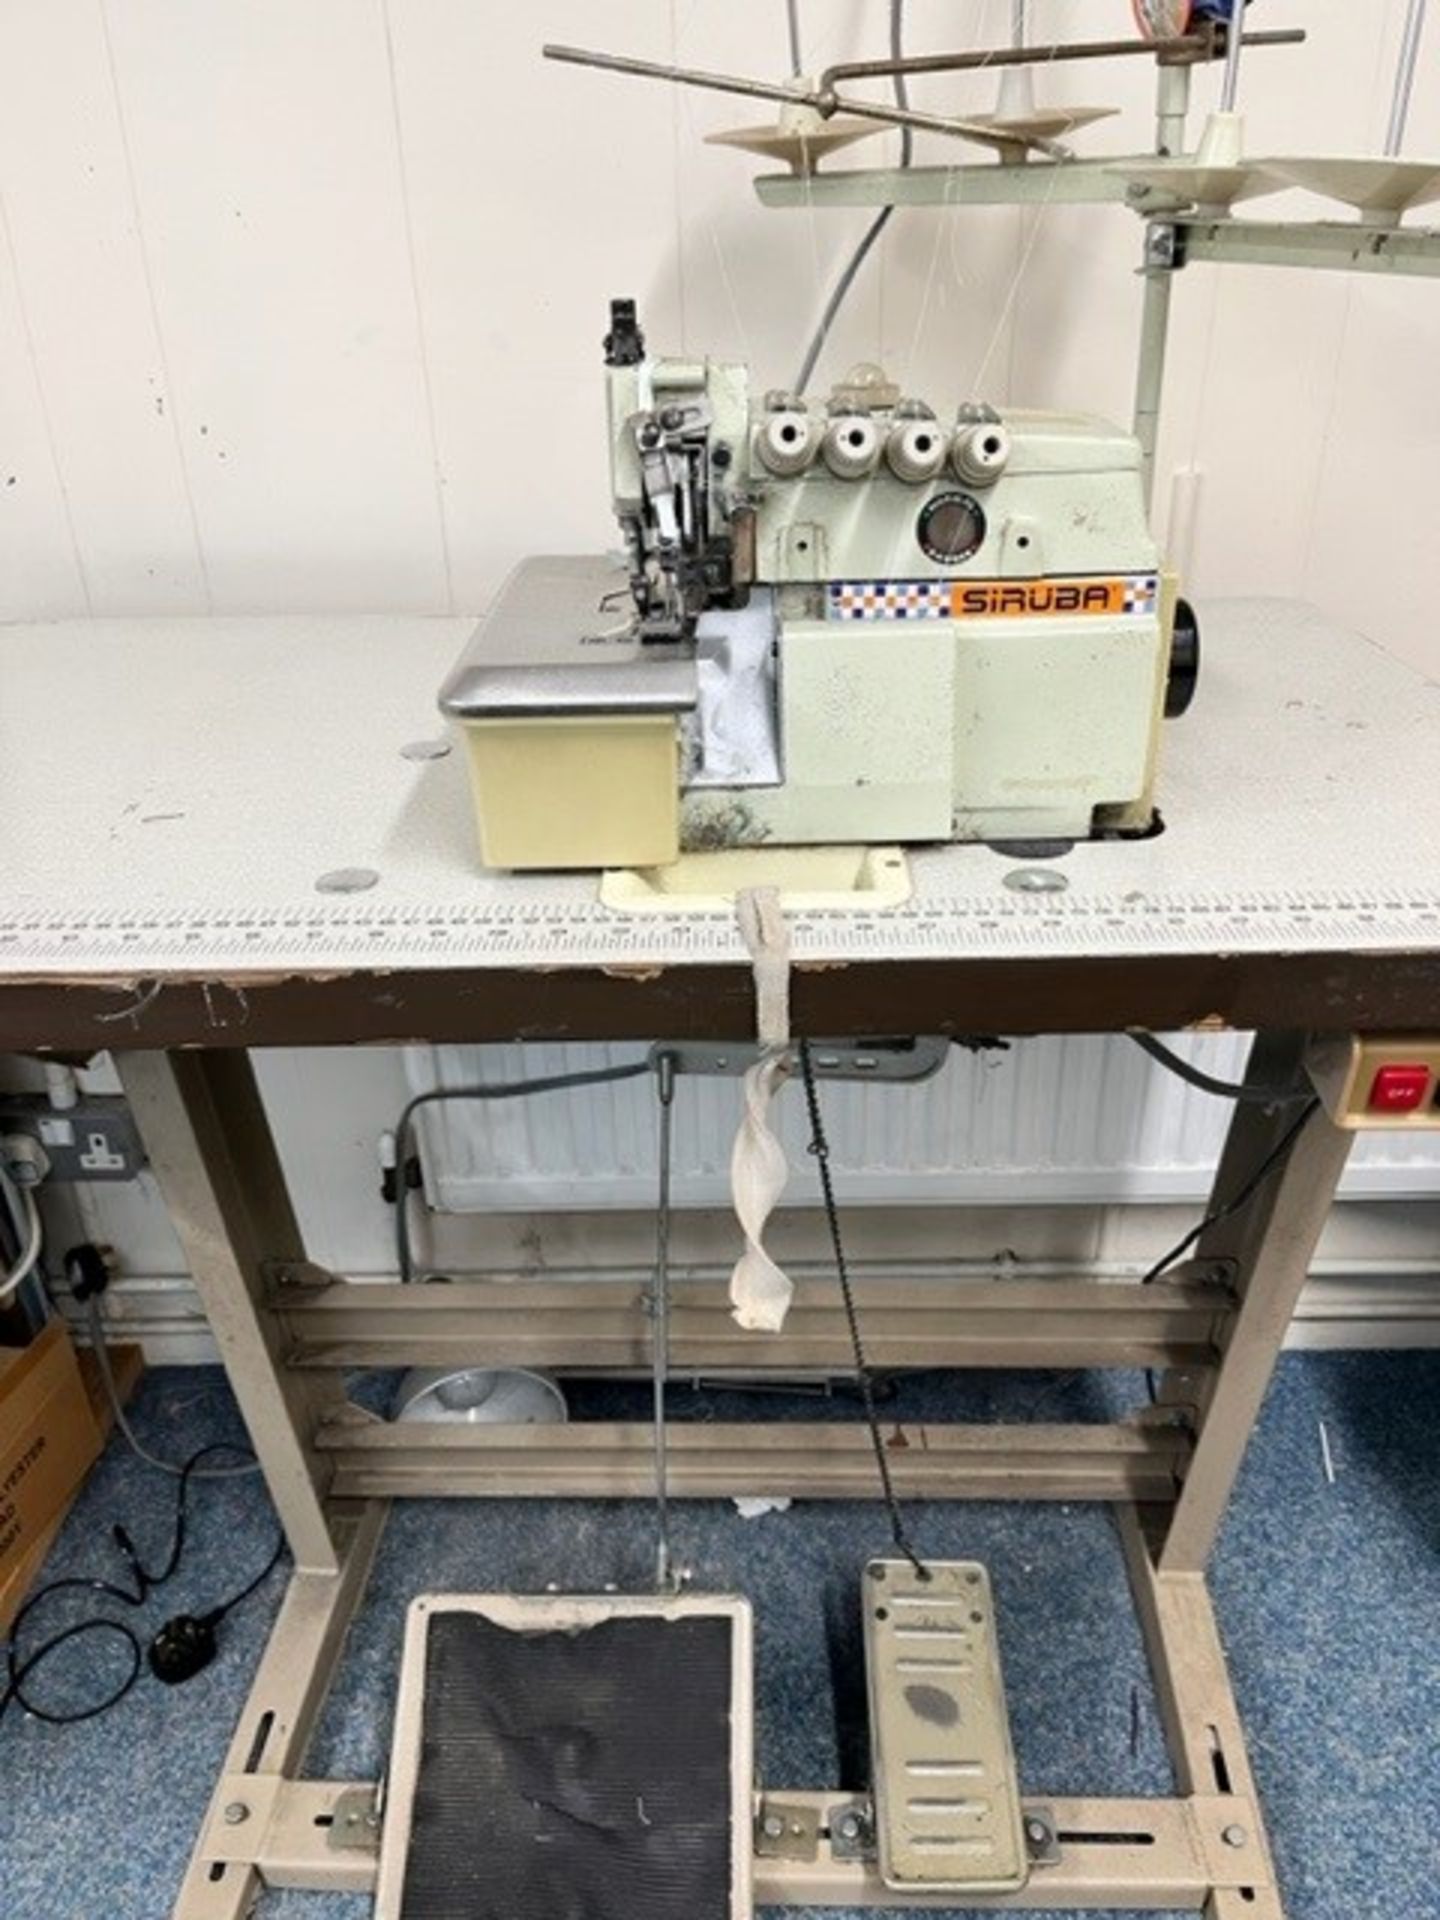 No VAT Siruba 4 thread overlocker £200, was working up to the recent closure of the sewing - Image 2 of 2